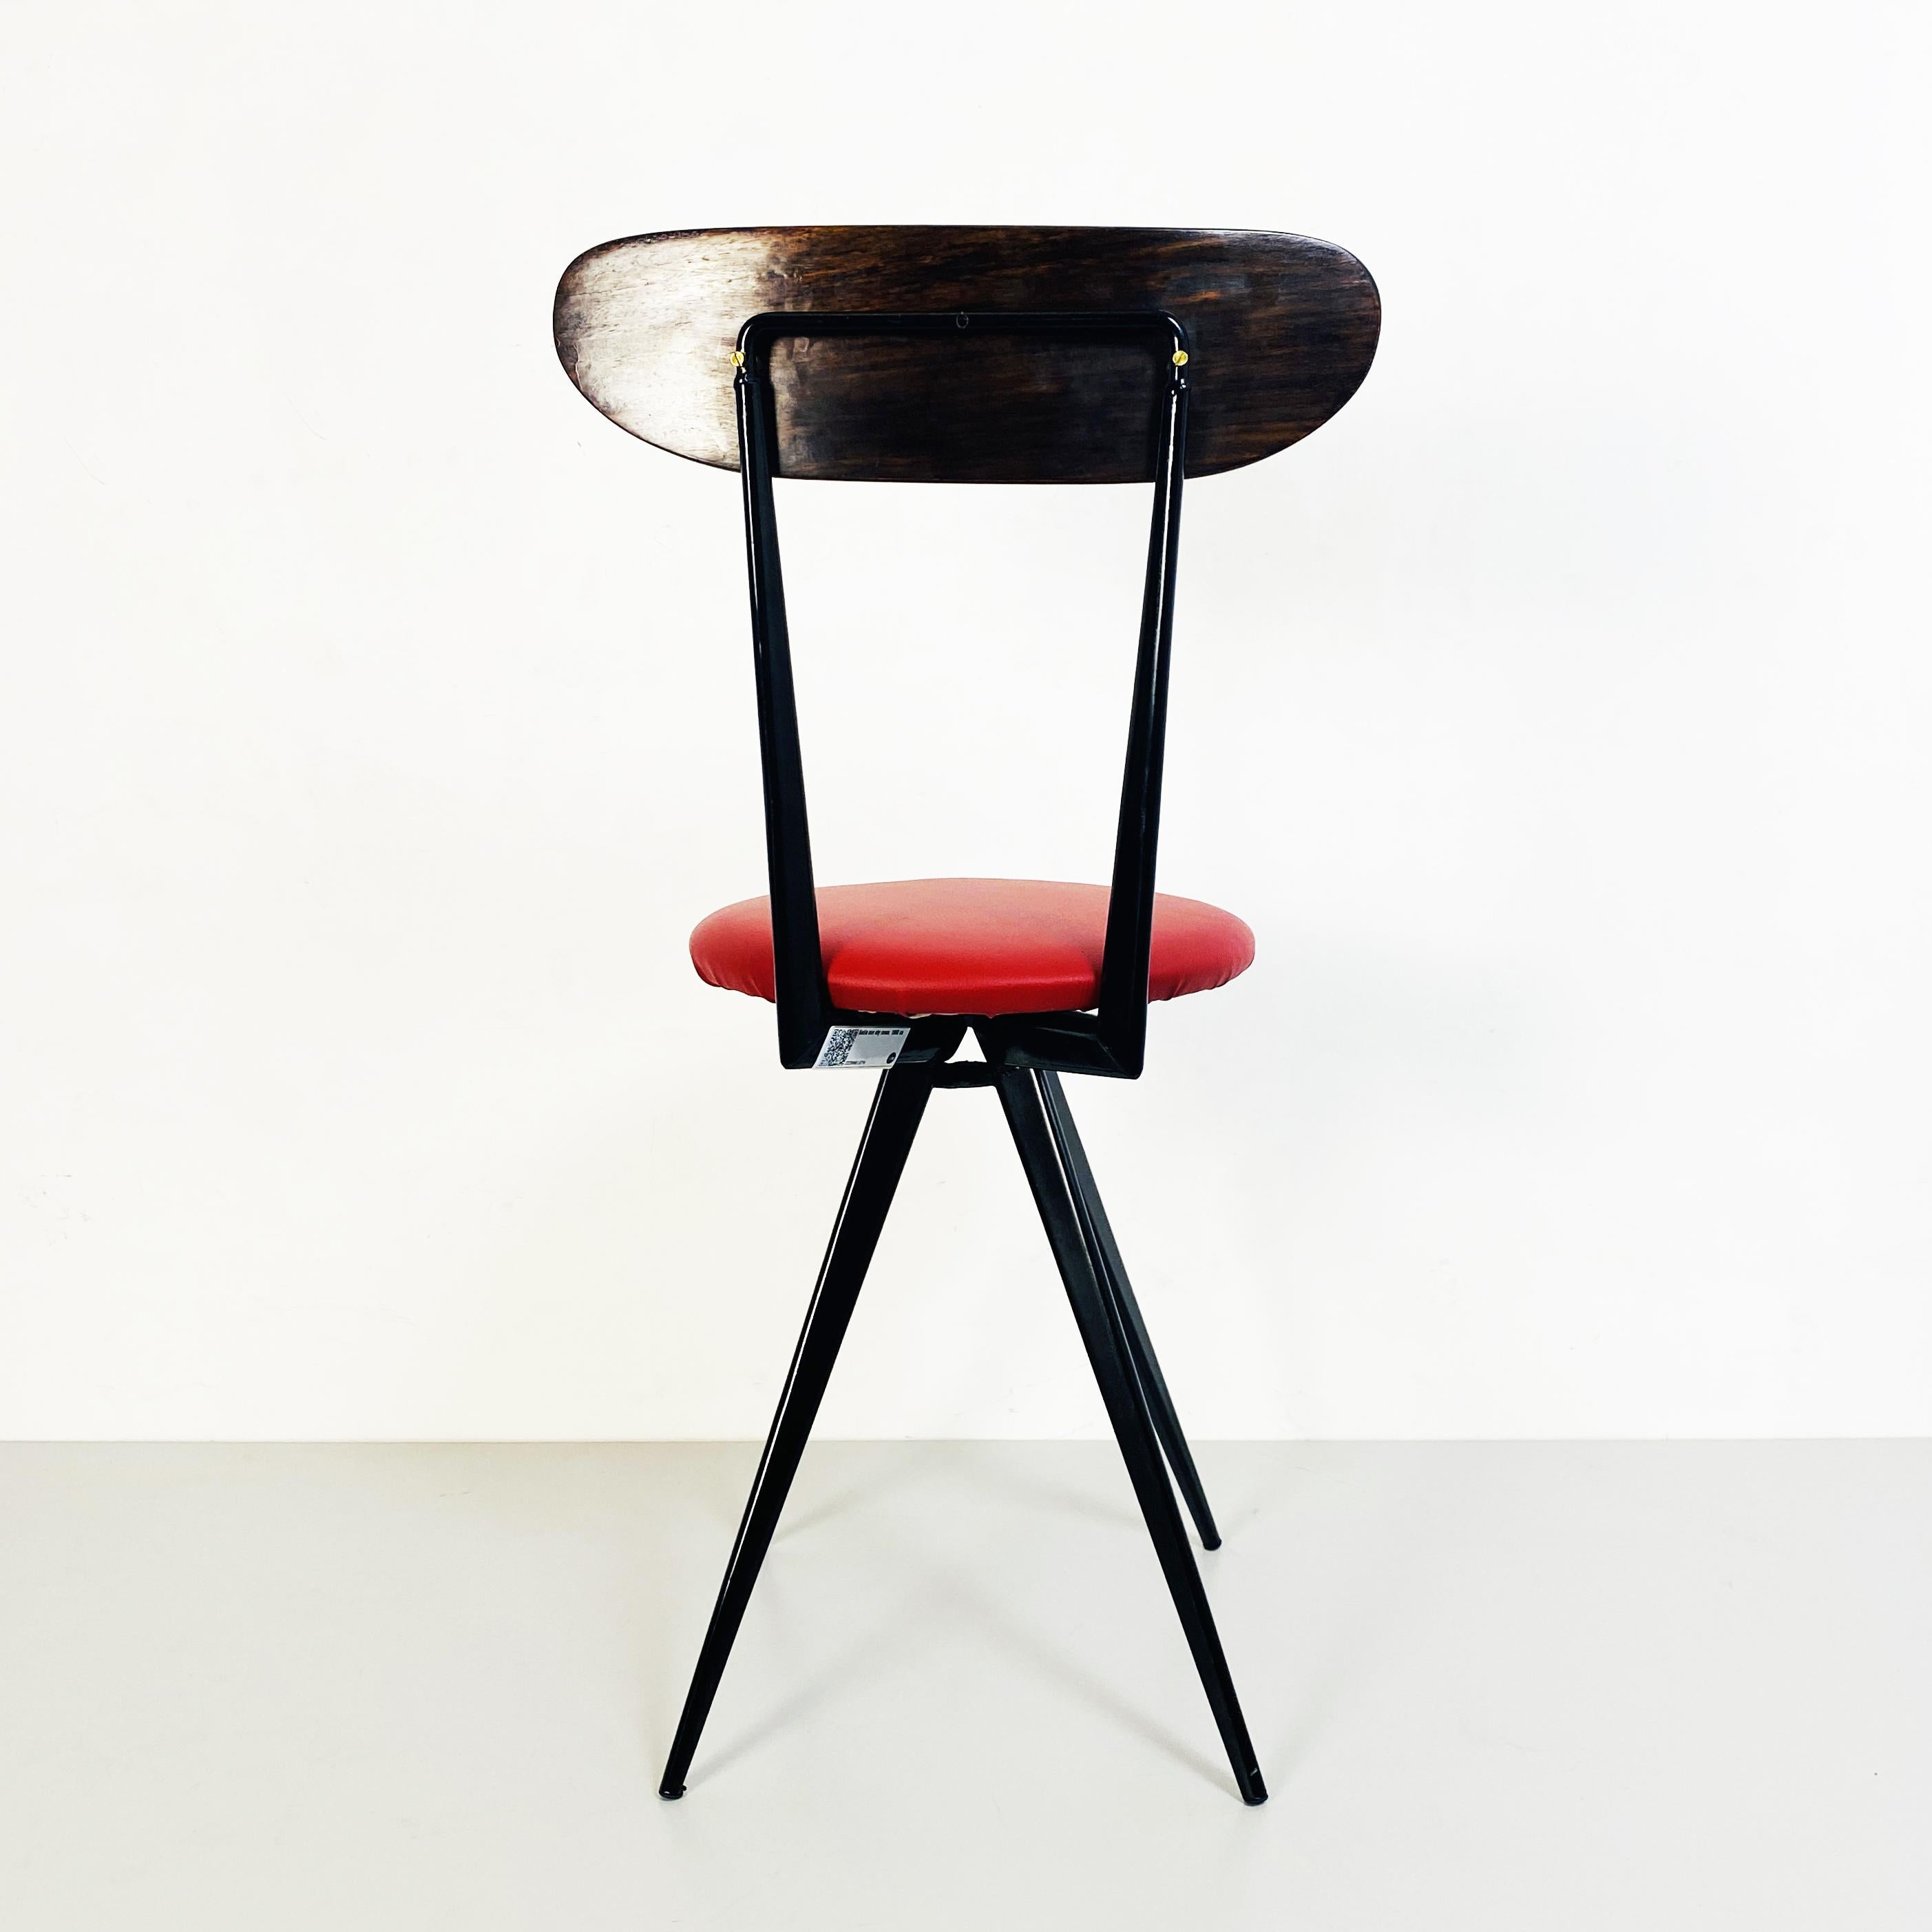 Italian Mid-Century Chair with Red Sky Seat, Metal and Wooded Structure, 1960s 5